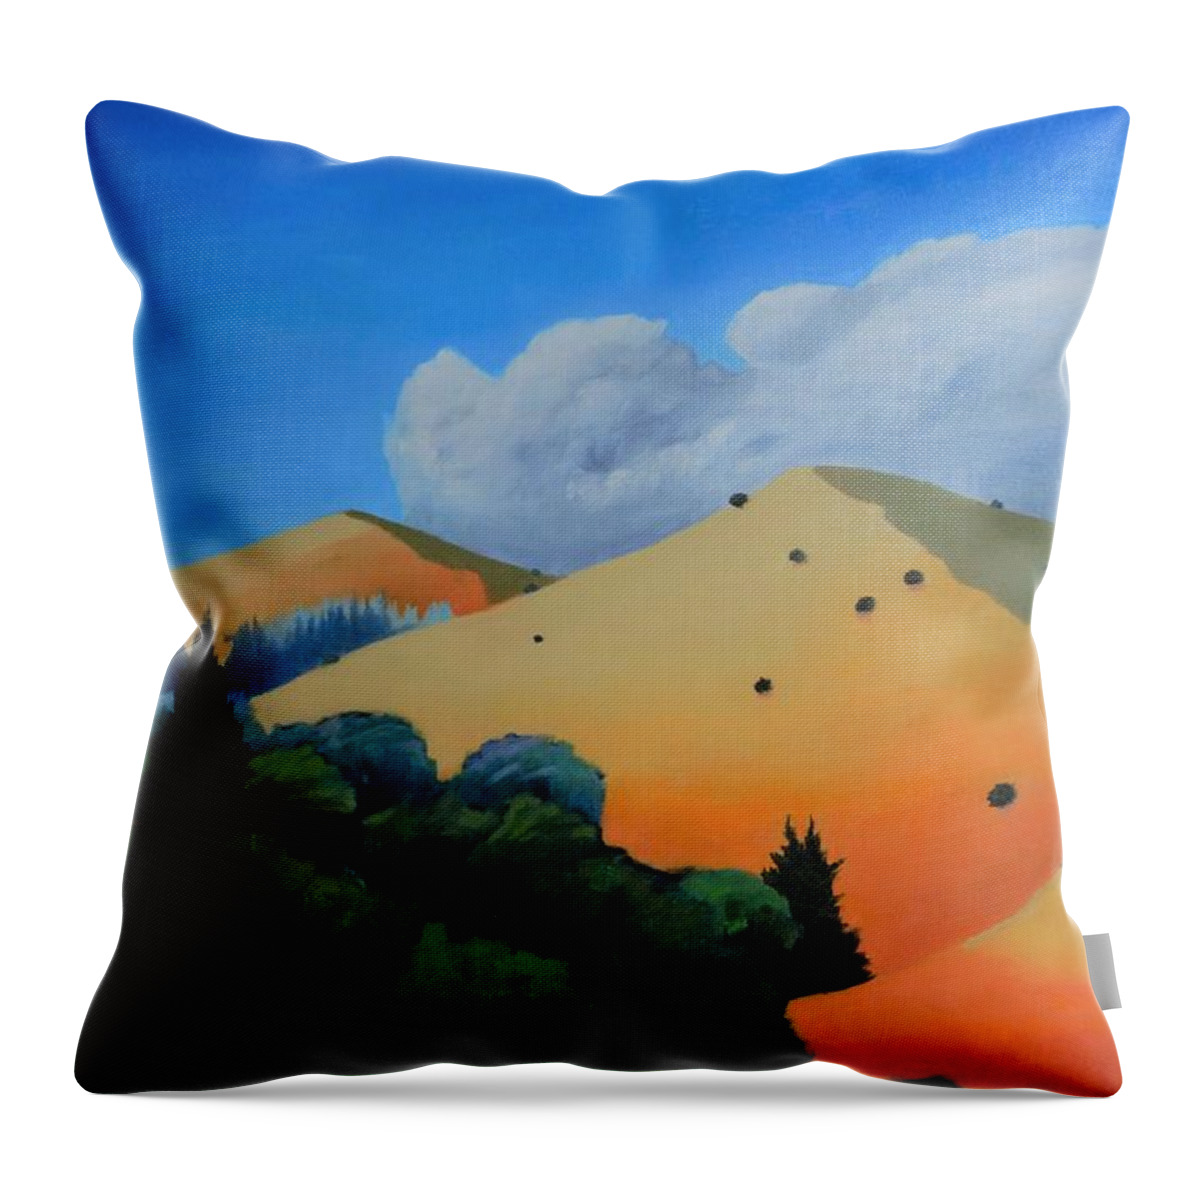 Triptych Throw Pillow featuring the painting Tripping 1 Edited by Gary Coleman